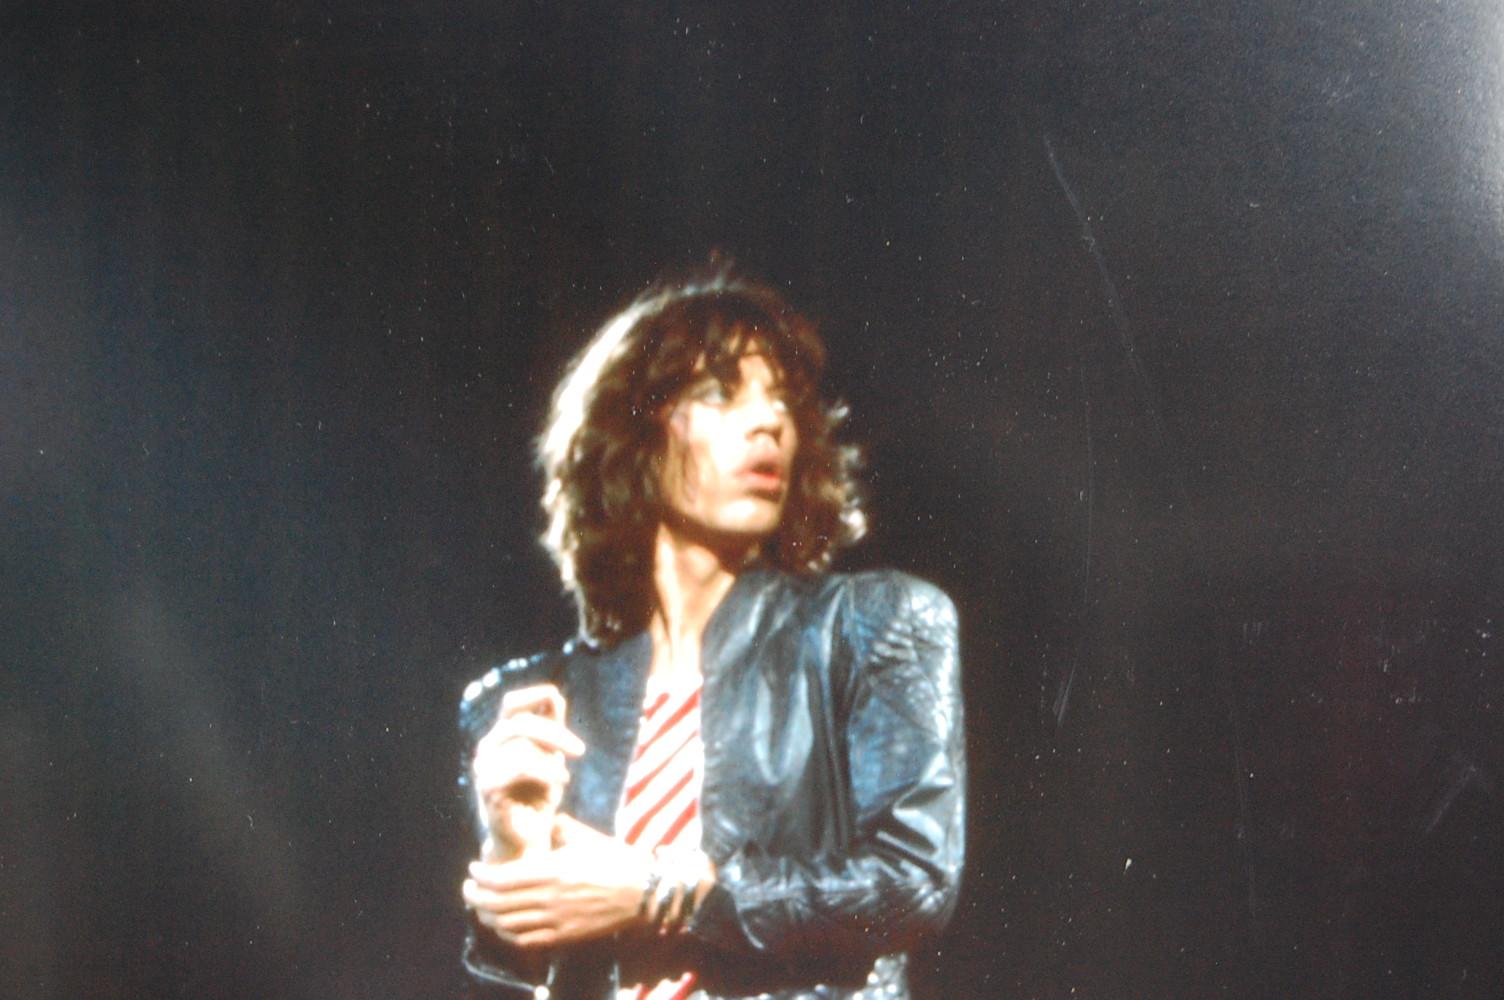 Jagger on Stage
Framed photograph by Freddy Warren of Rolling Stone Mick Jagger on stage. Action Shot London, circa 1970.
From original negatives of the Freddy Warren Collection.
Professionally framed.

Freddy Warren.

Freddy became